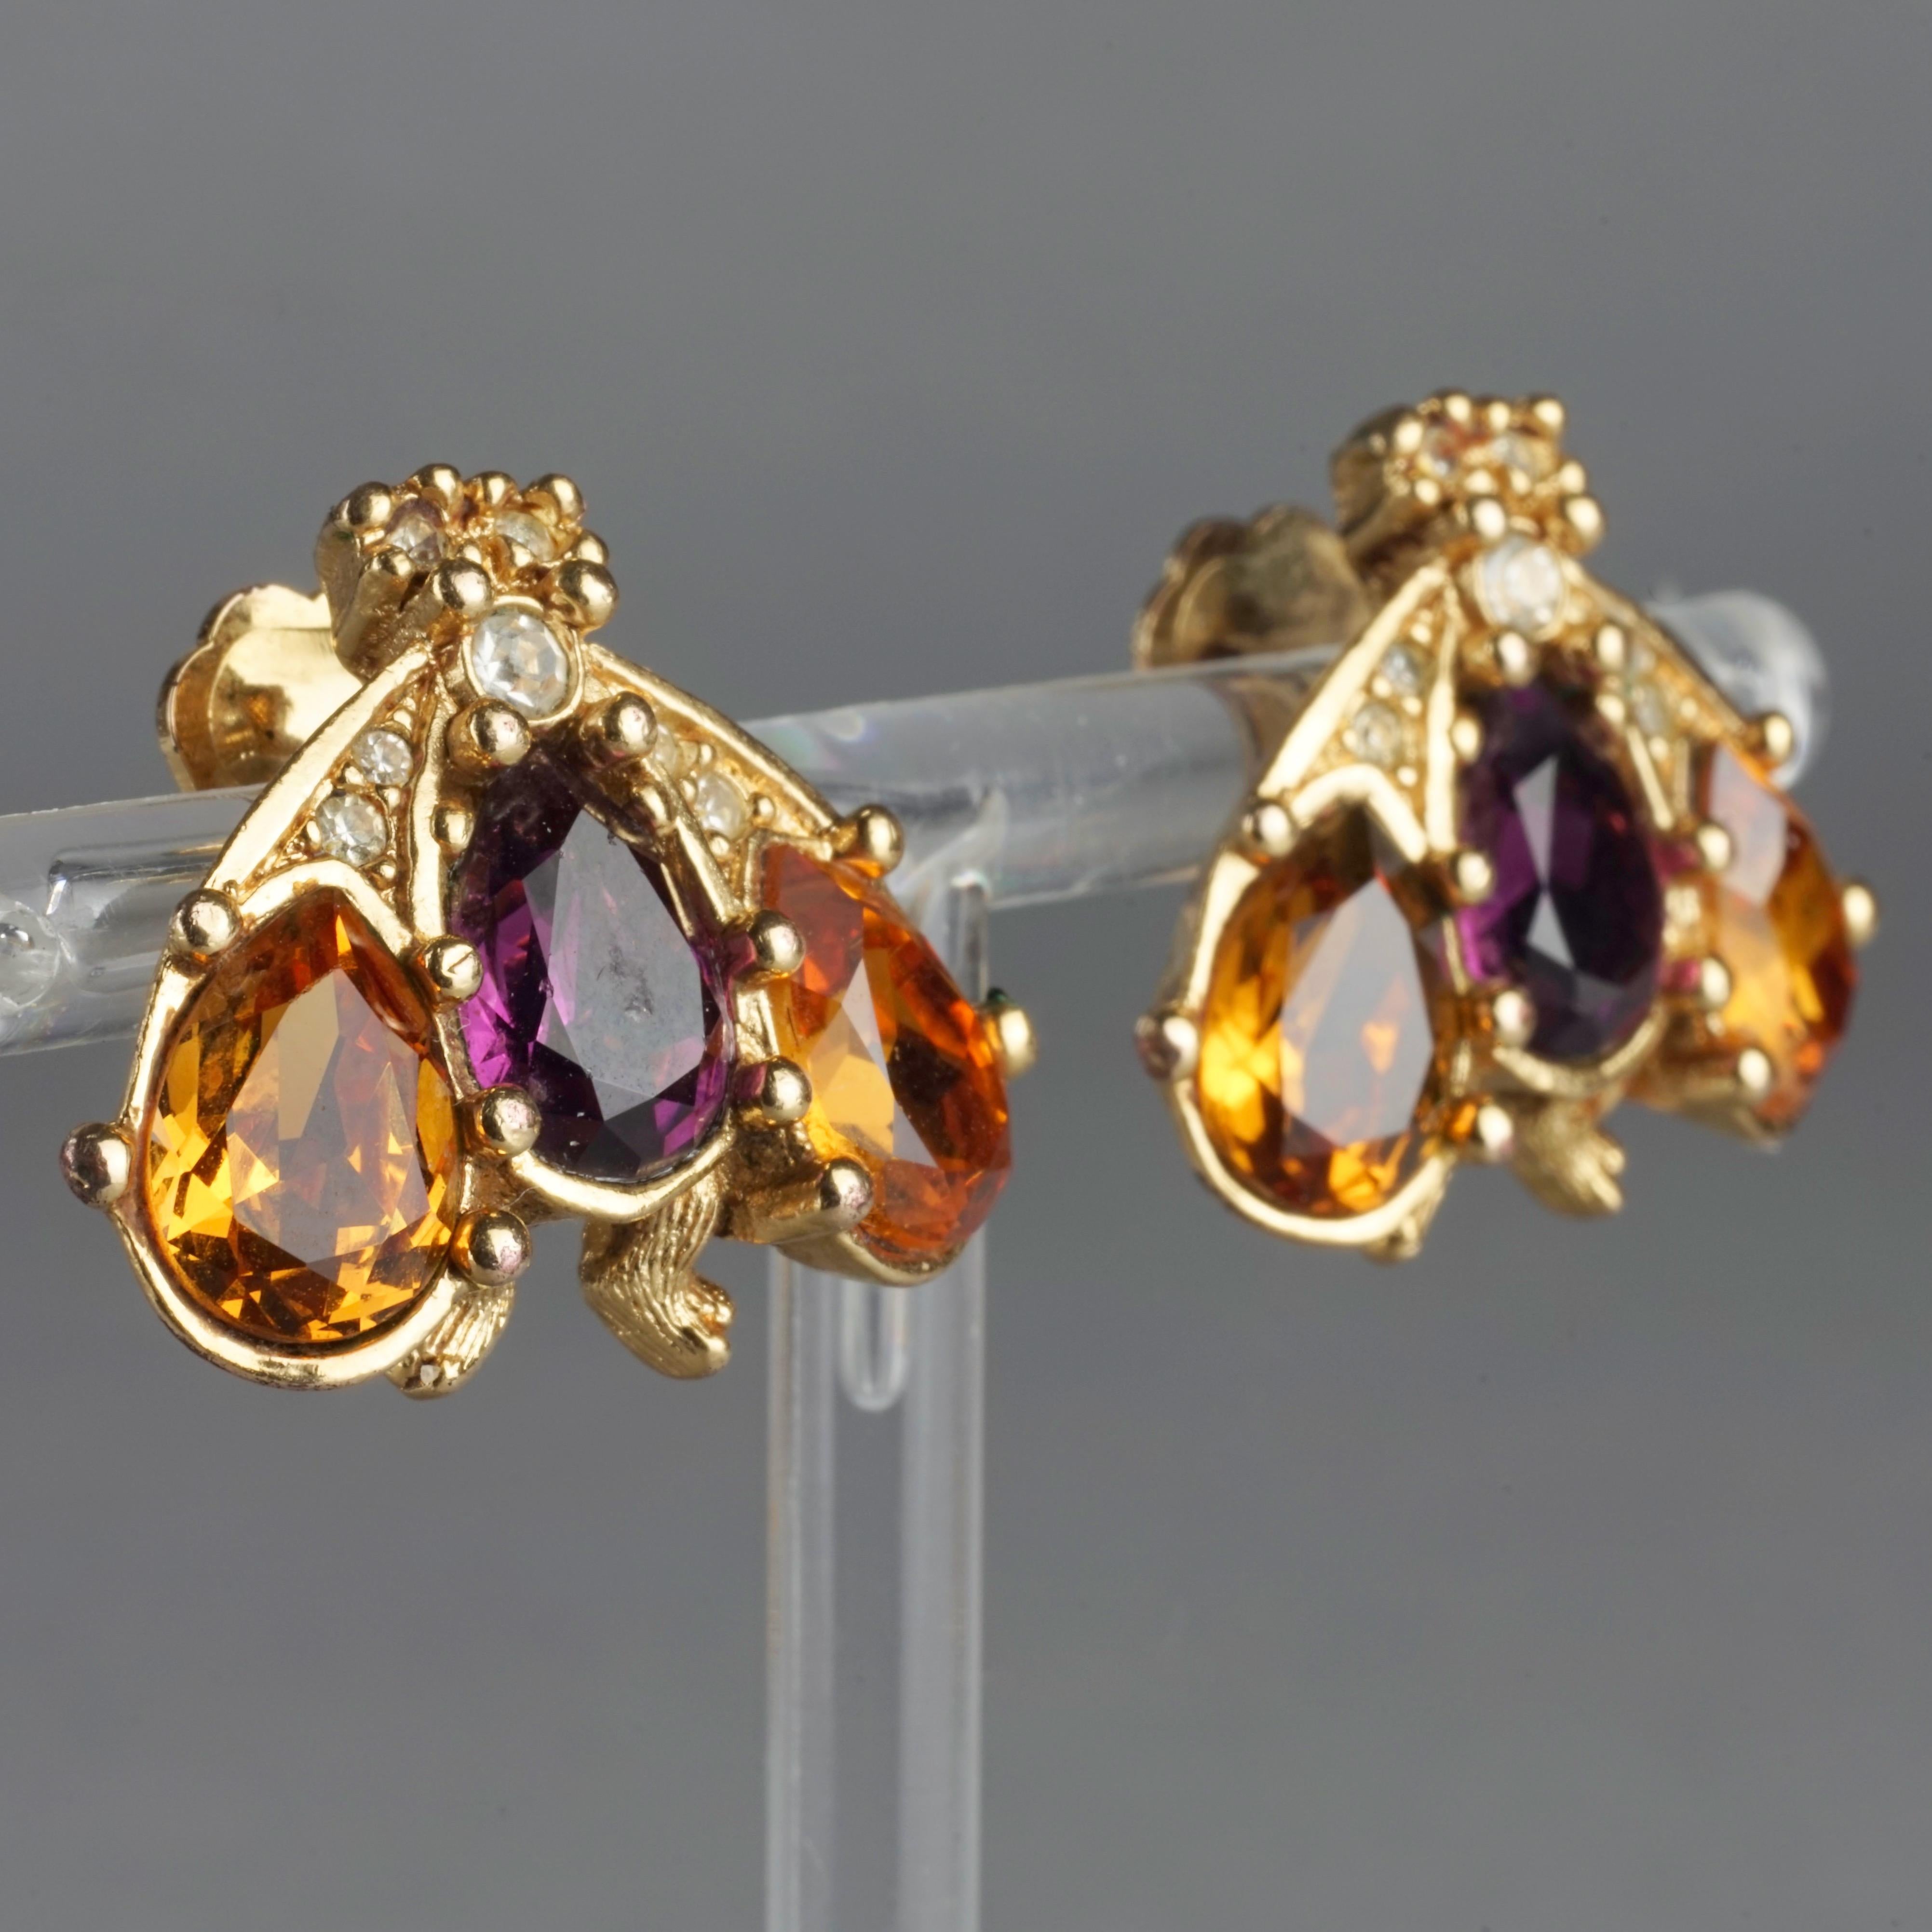 Women's Vintage CHRISTIAN DIOR Jewelled Bumble Bee Earrings